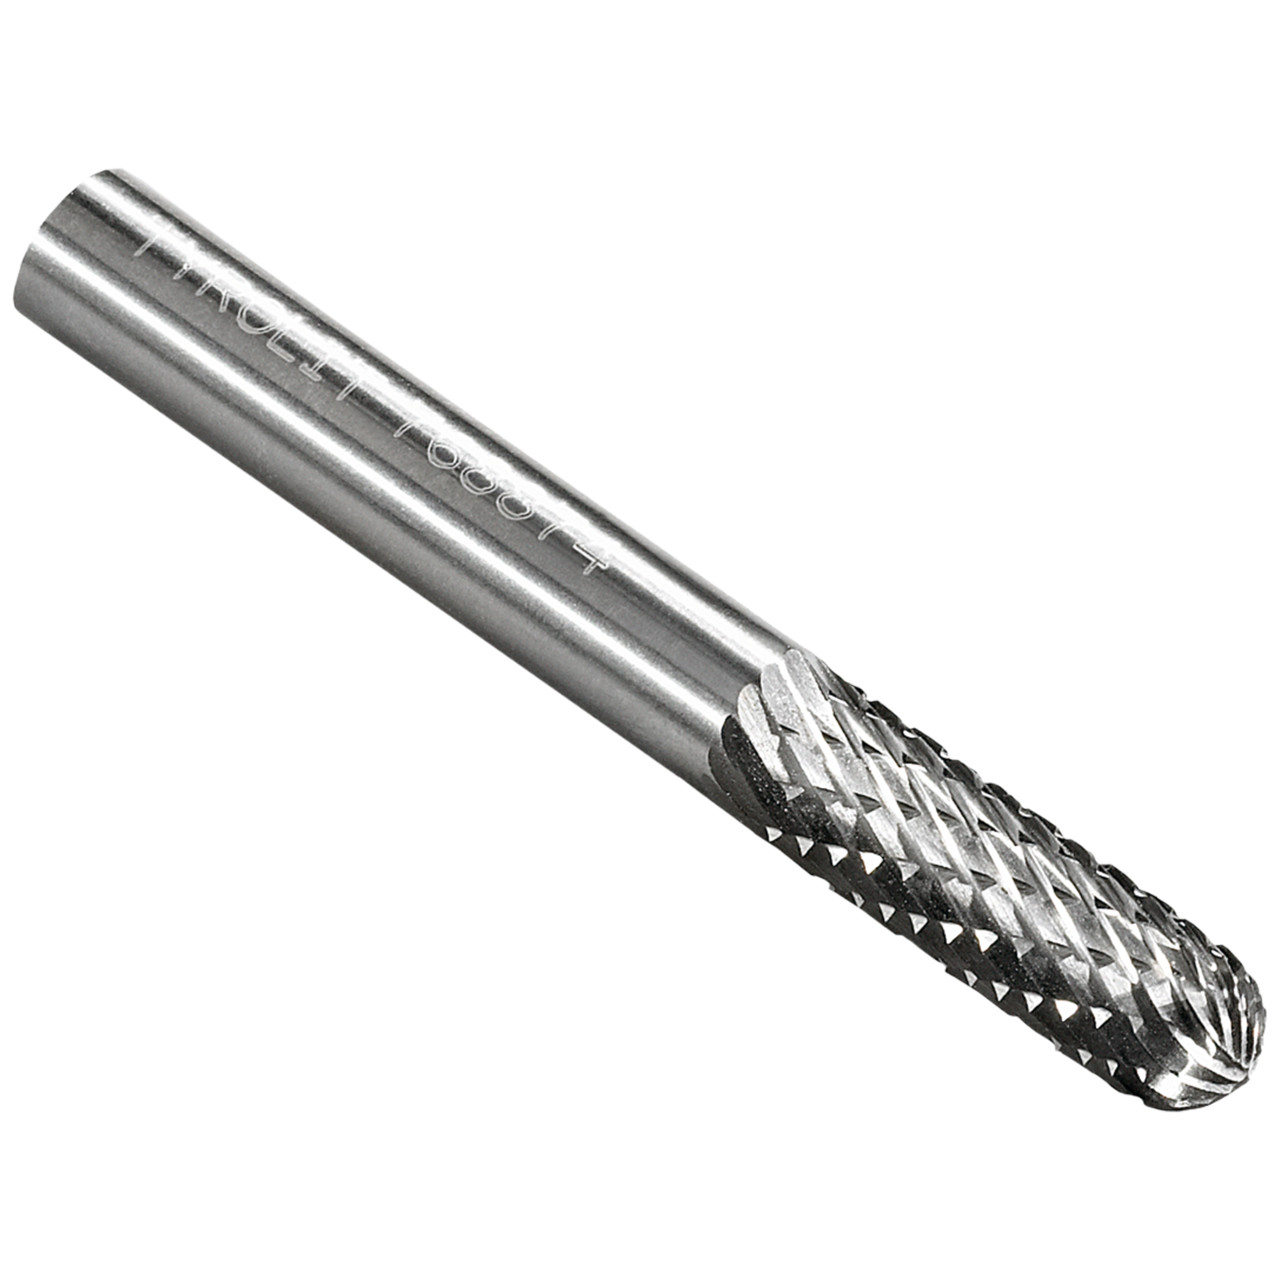 TYROLIT carbide end mill DxT-SxL 10x19-6x65 For cast iron, steel and stainless steel, shape: 52WRC - cylindrical, Art. 768881